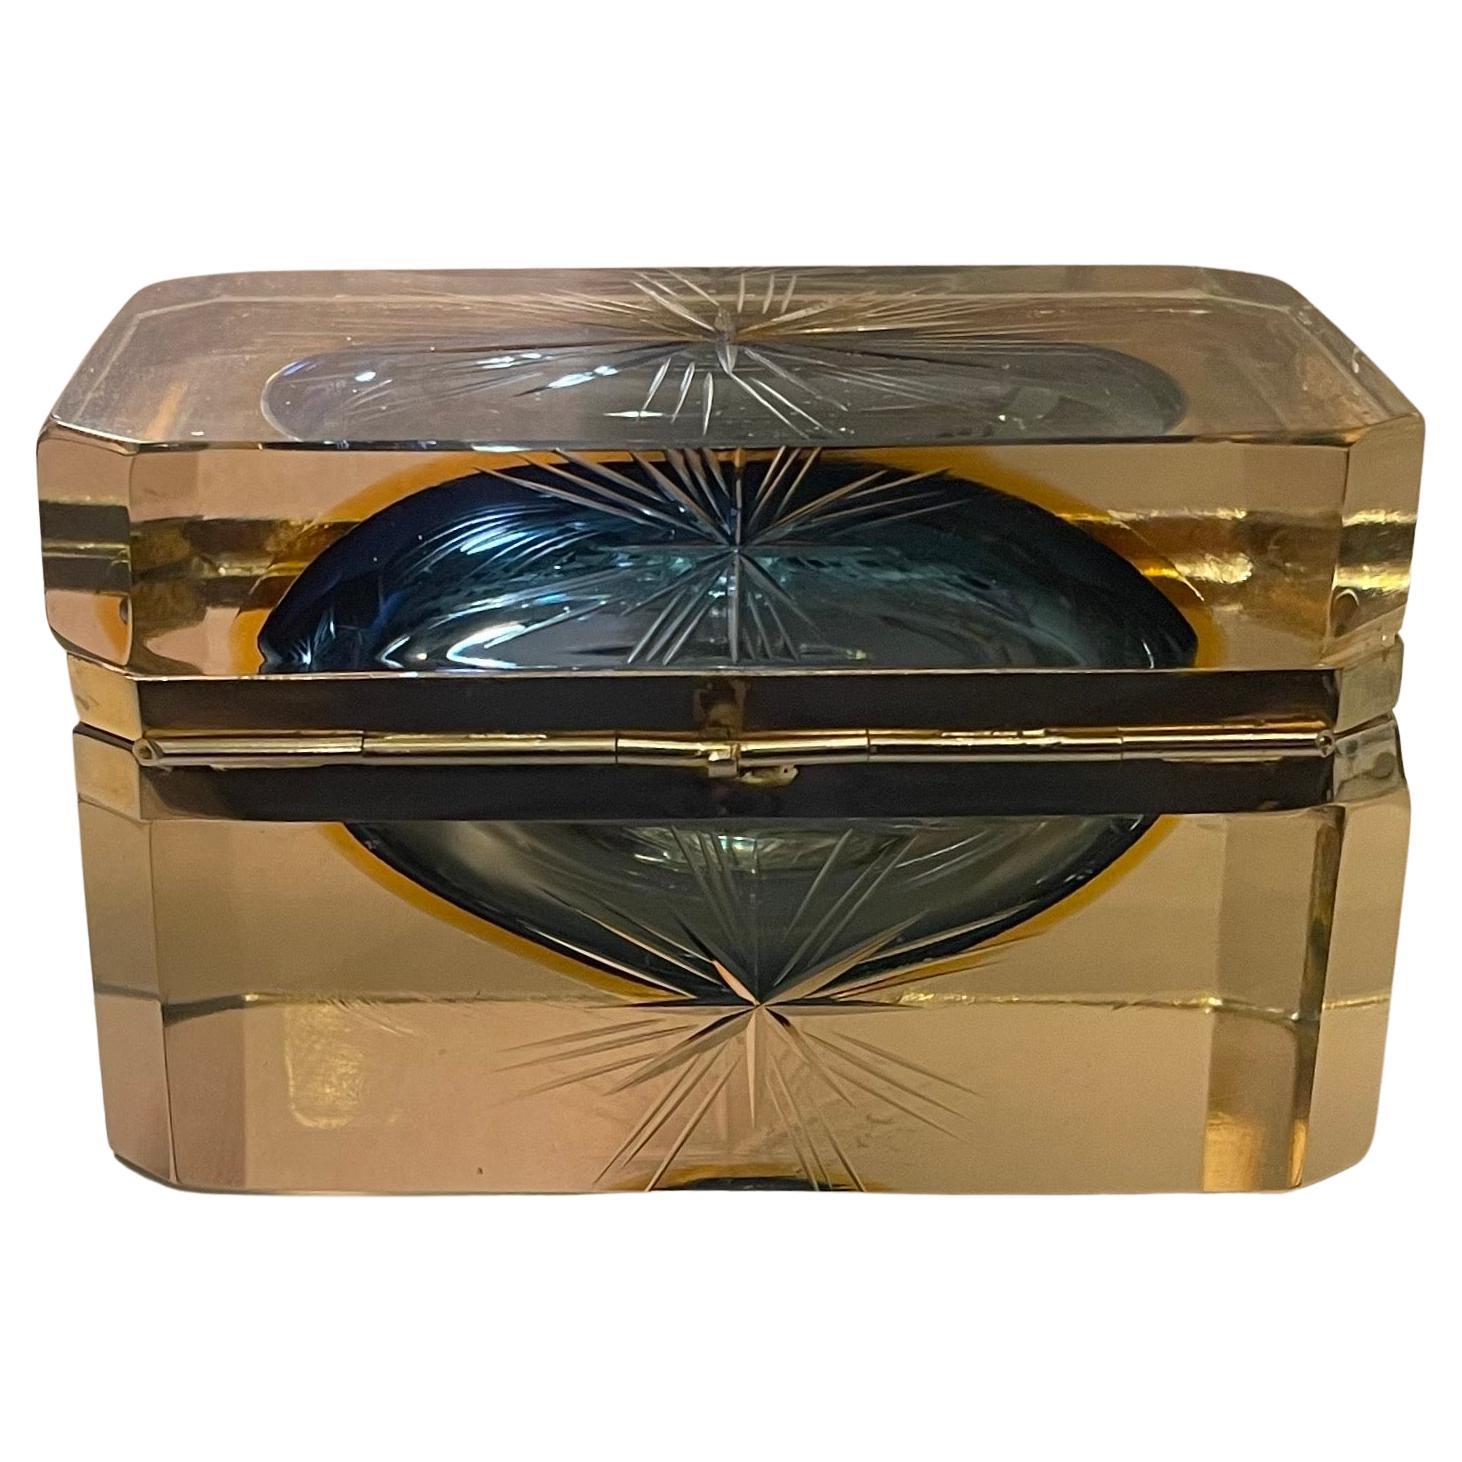 A Wonderful Mid Century Modern Art Glass / Crystal Jewelry Box / Casket With Beautiful Star Pattern Etching Throughout And Brass Ormolu Hardware, In The Manner & Style Of Baccarat.